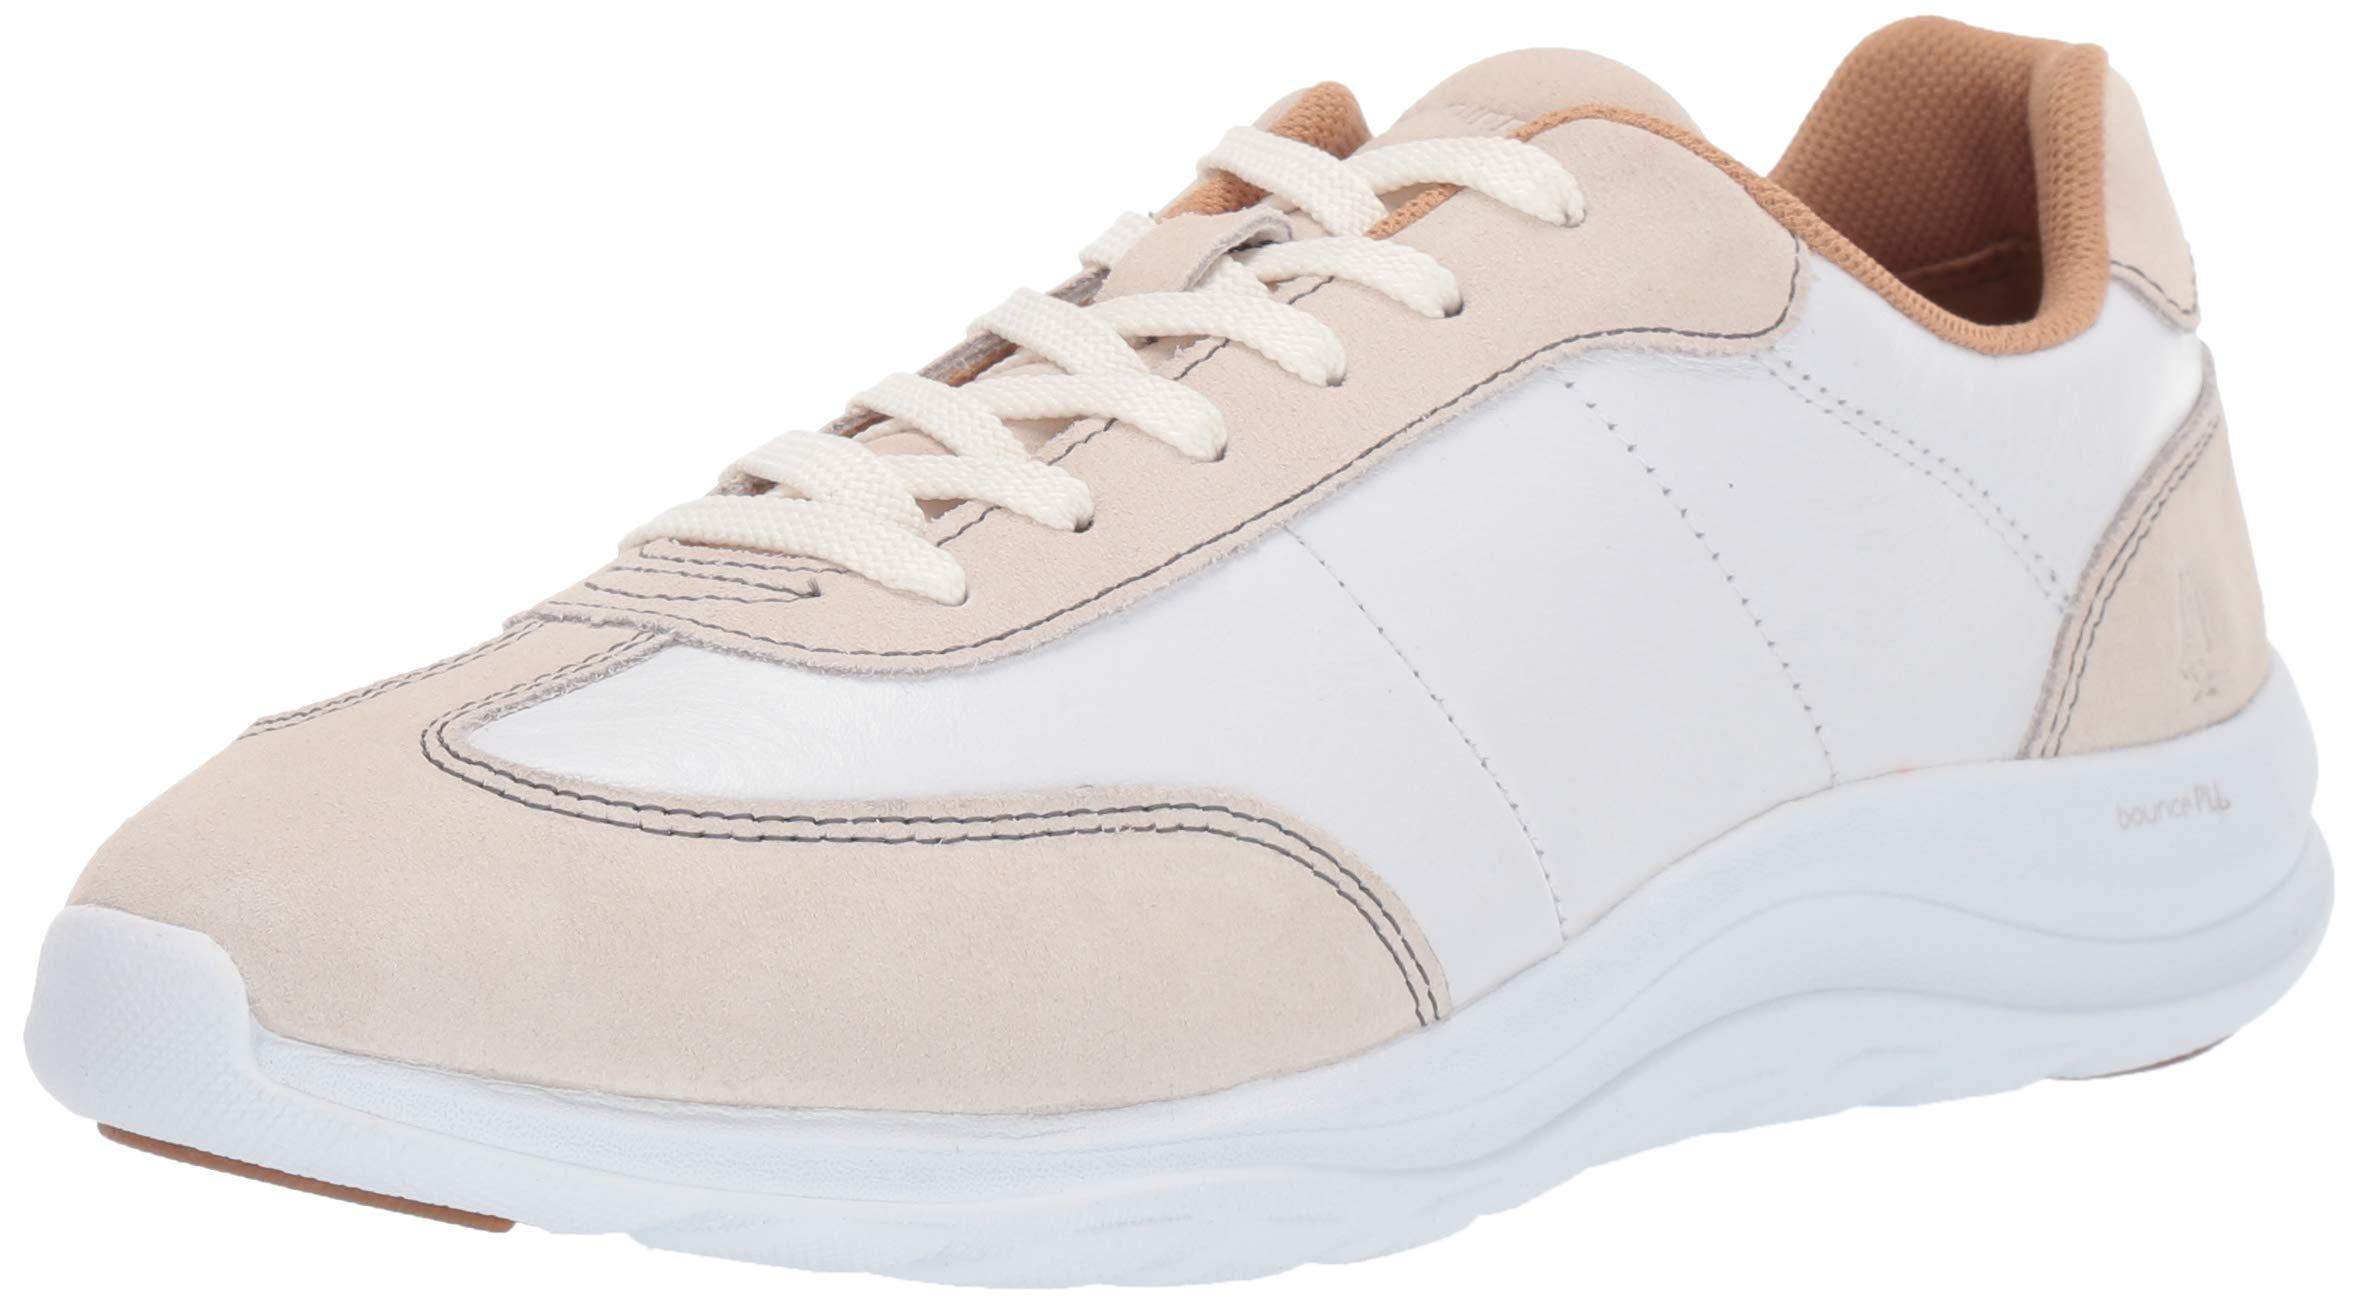 Hush Puppies Suede Cassidy Sneaker Oxford in Ivory Suede/White Leather ...